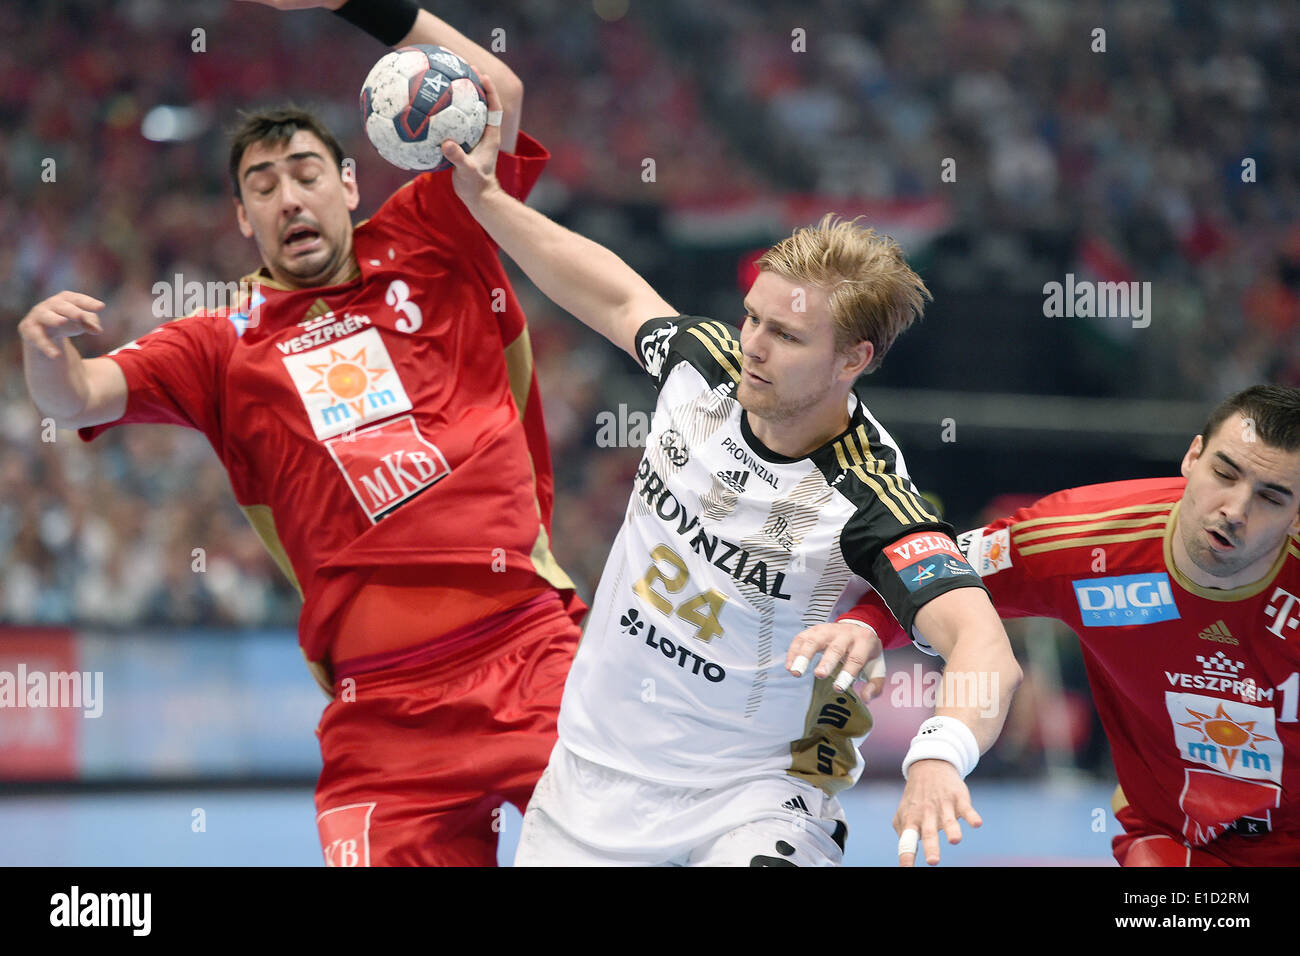 Cologne, Germany. 31st May, 2014. Kiel's Aron Palmarsson (M) in action against Veszprem's Peter Gulyas (L) and Carlos Ruesga Pasarin during the Handball Champions League EHF Final Four match between MKB Veszprem and THW Kiel at the Lanxess-Arena in Cologne, Germany, 31 May 2014. Photo: MARIUS BECKER/dpa/Alamy Live News Stock Photo